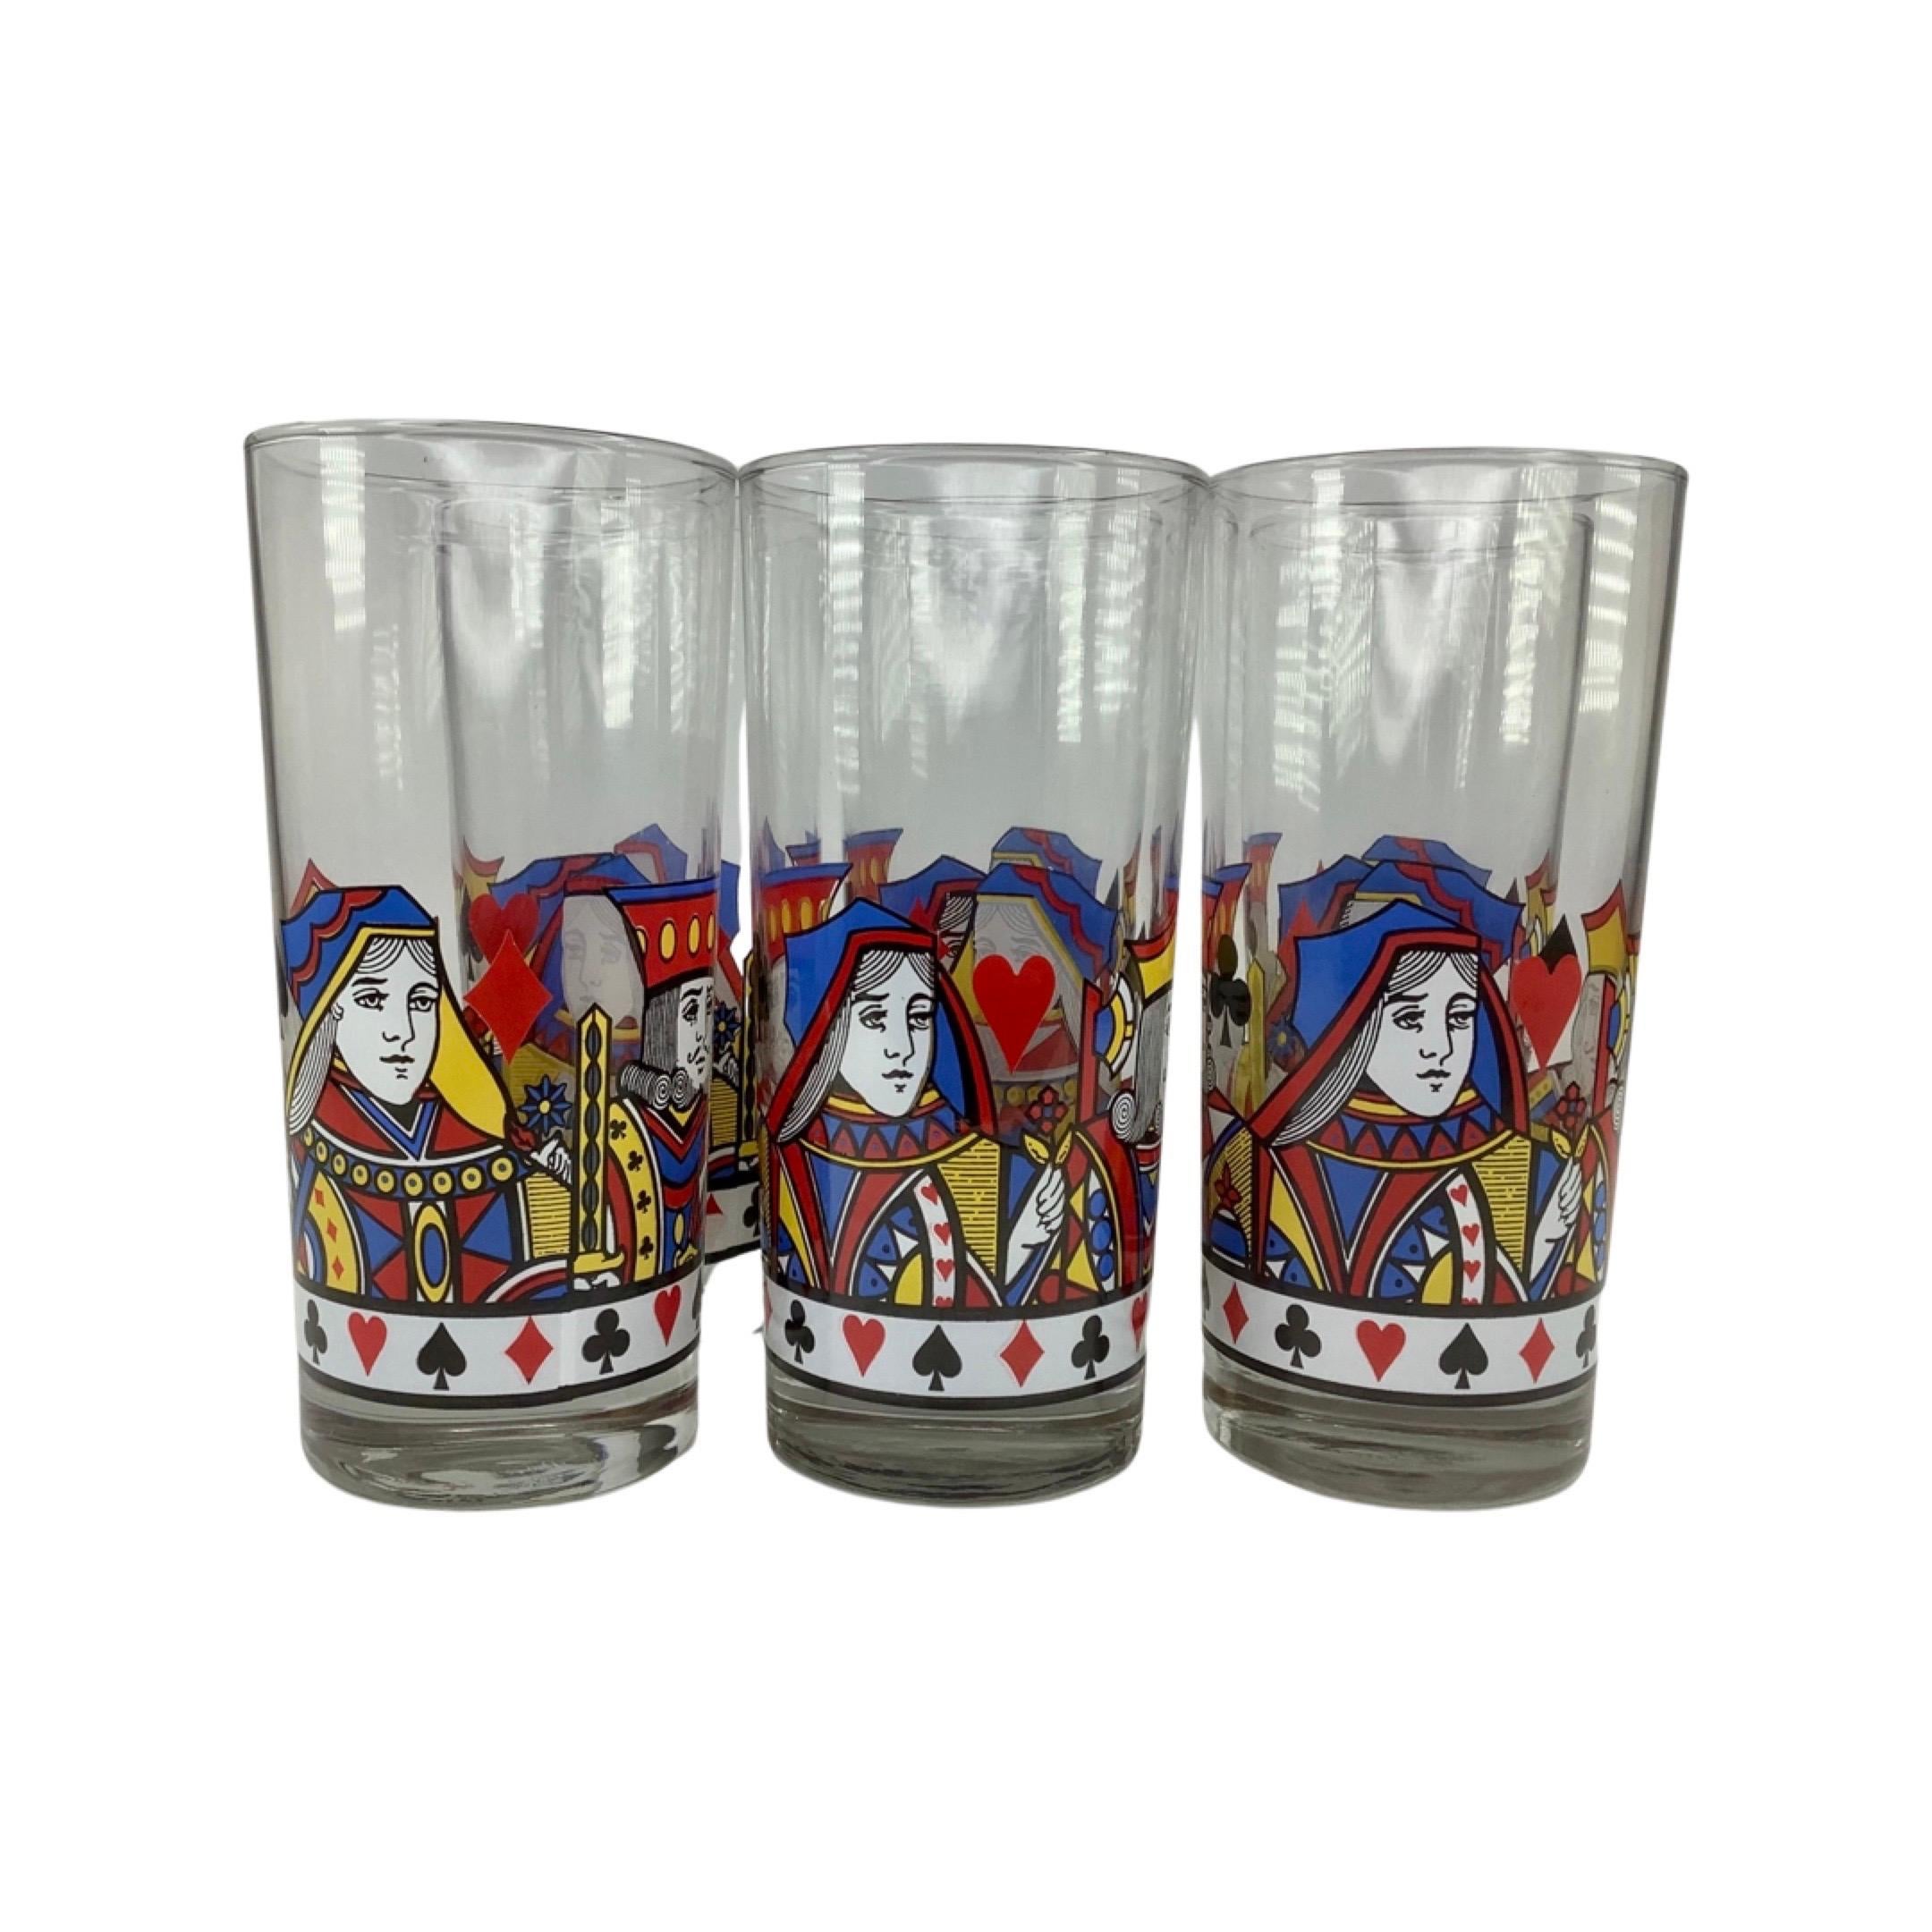 Set of 6 Vintage Card Suit Highball Glasses. Each glass with colorful enameled decoration of heads of kings and queens. A white band with enameled heart, spade, diamond and club finish the decoration on the glass. All in excellent vintage condition.